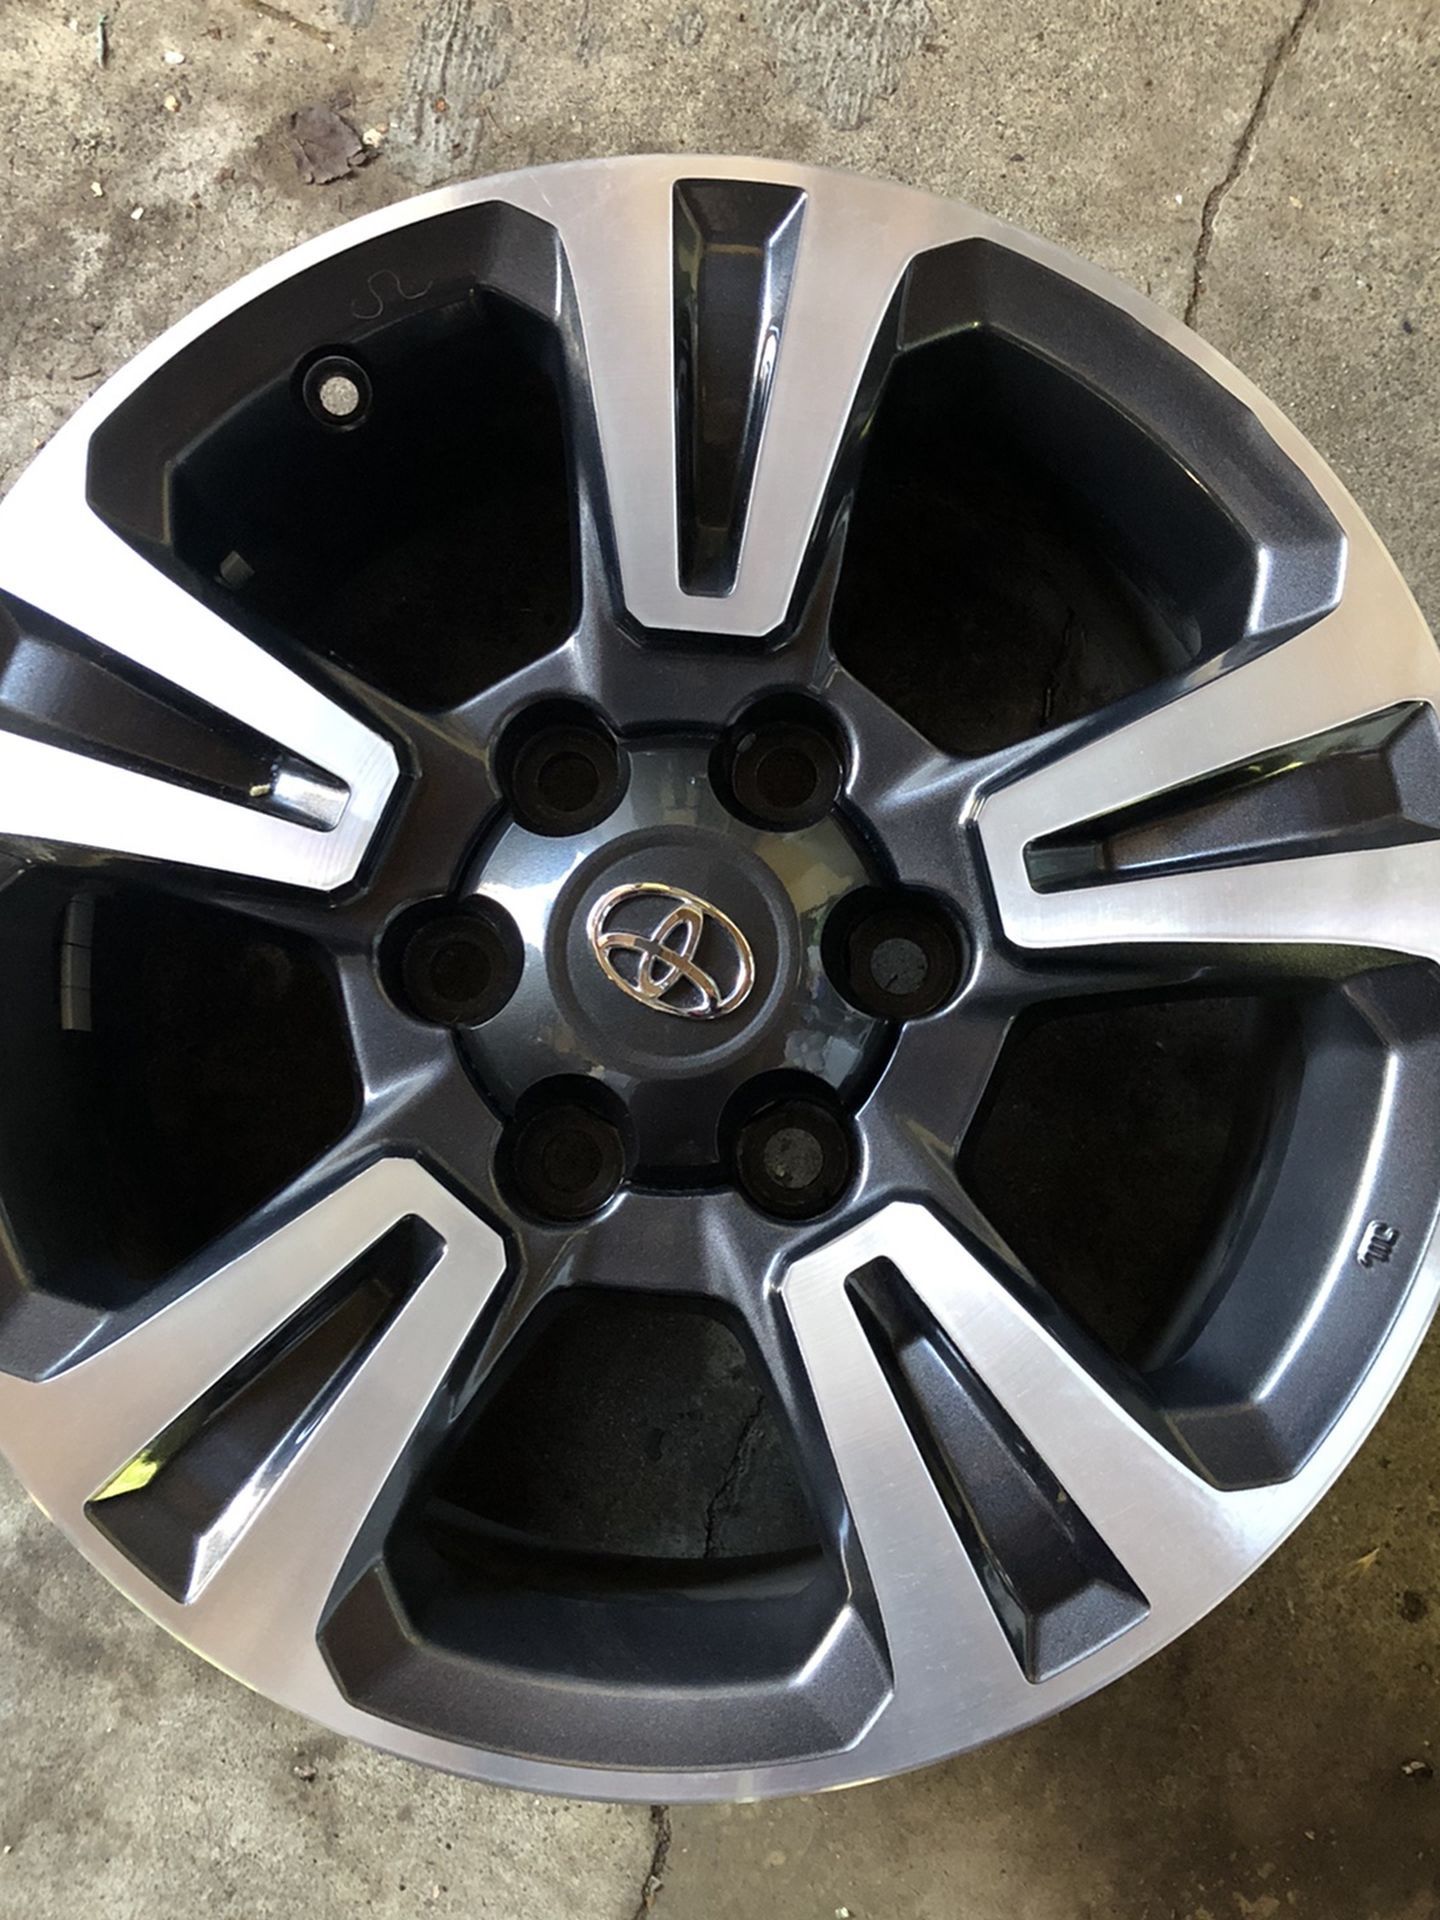 4 RIMS TOYOTA SIZE 17 TRD STOCK THEY FIT TACOMA SEQUOIA 4RUNNER 6 LUGS GREAT CONDITION 9/10 